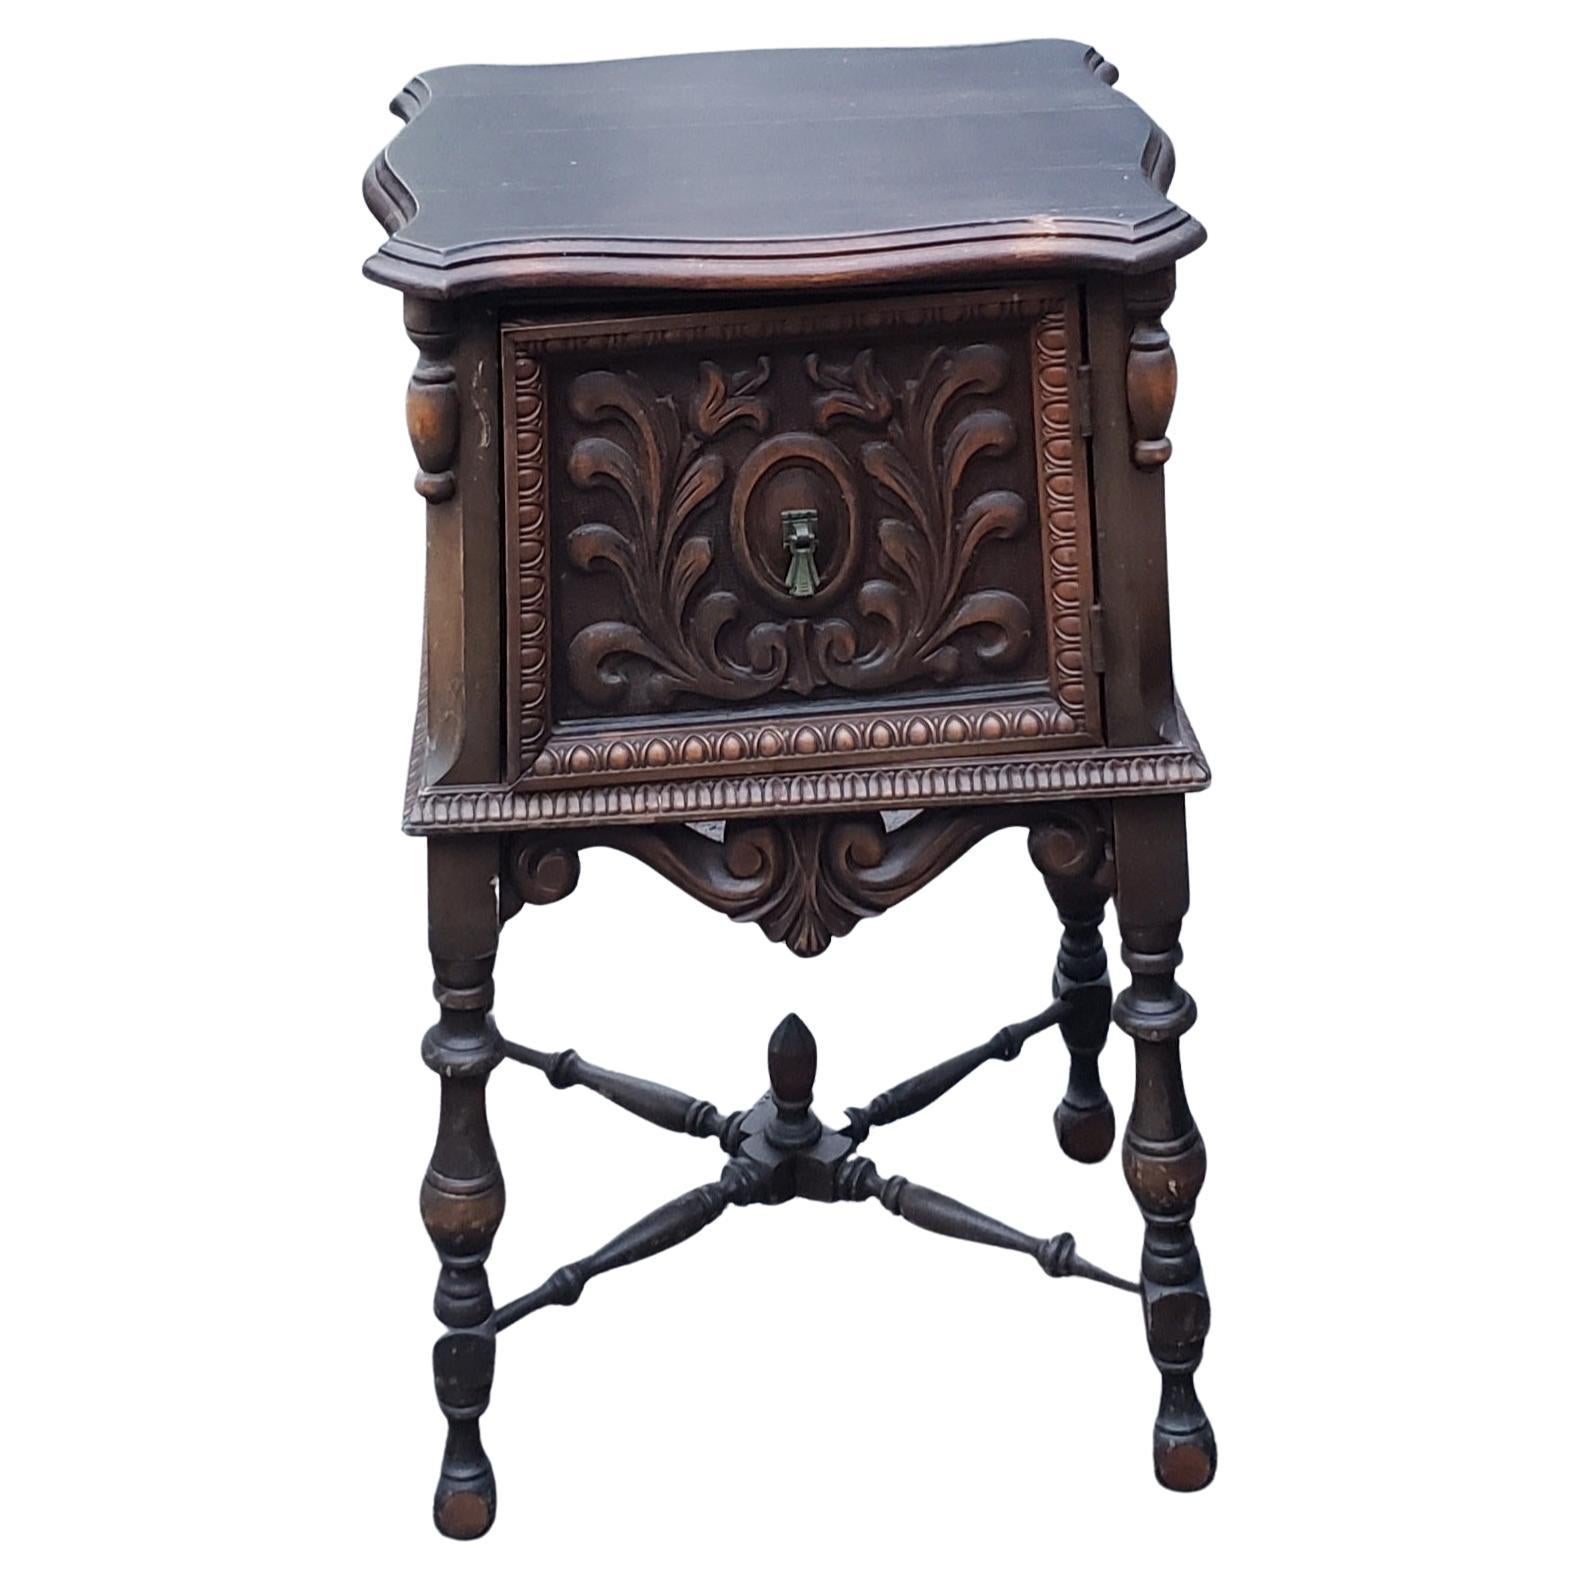 1920sth century Jacobean Revival carved walnut side table, with carved and bobbin turned legs and door,
Antique Jacobean Carved Walnut Side Table Nightstand with Copper Lining. Fine carvings. 
Very good condition
Measure 15